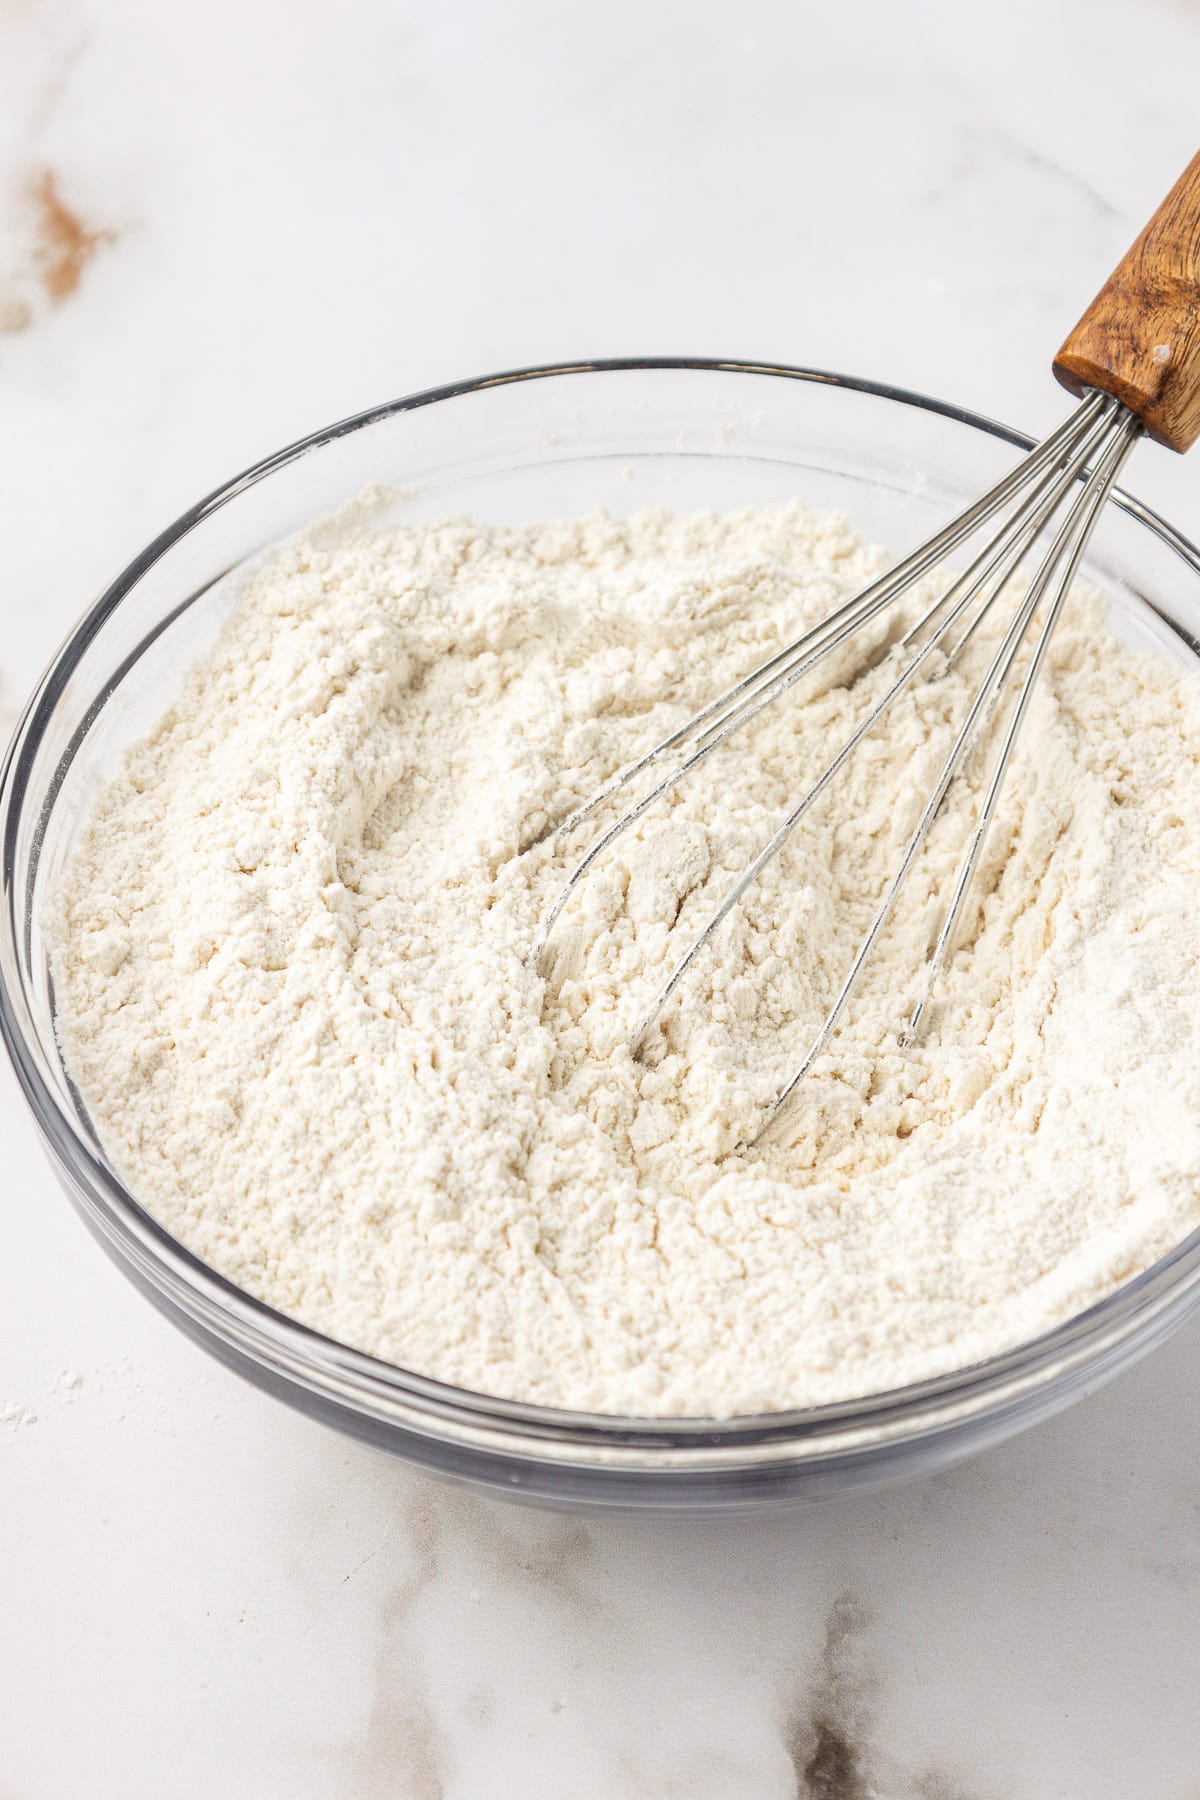 dry ingredients for vanilla cake being whisked in a clear glass bowl